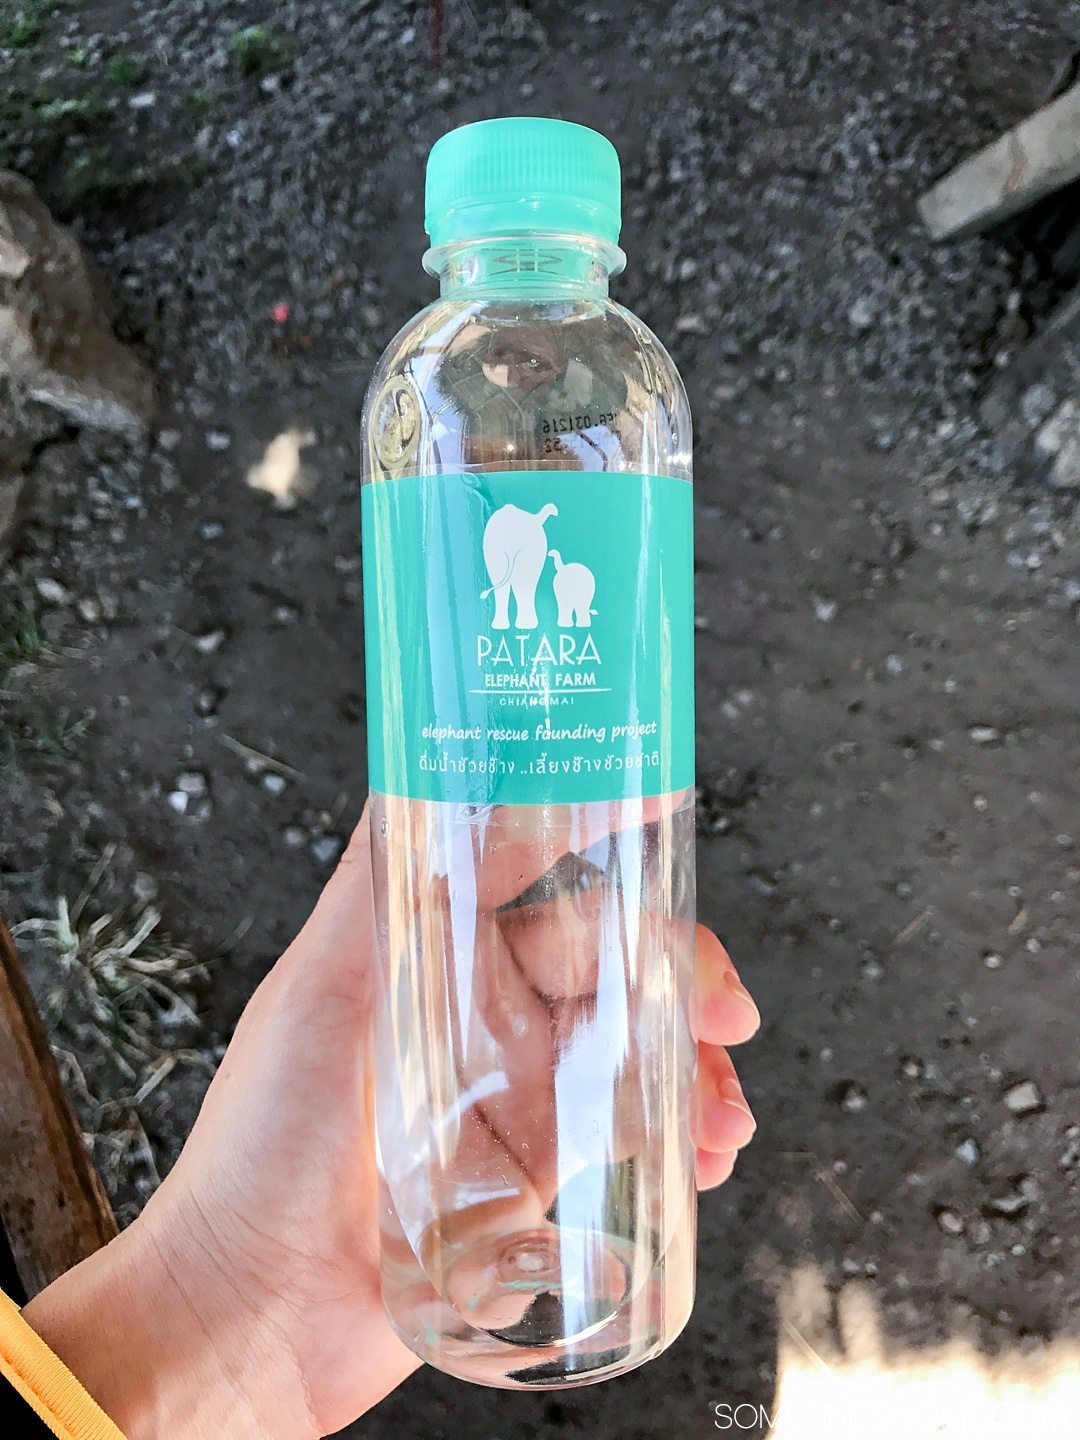 Vital FAQs Answered About Patara Elephant Farm in Chiang Mai. Information by Sometimes Home travel blog. A photo of their custom branded water bottles.